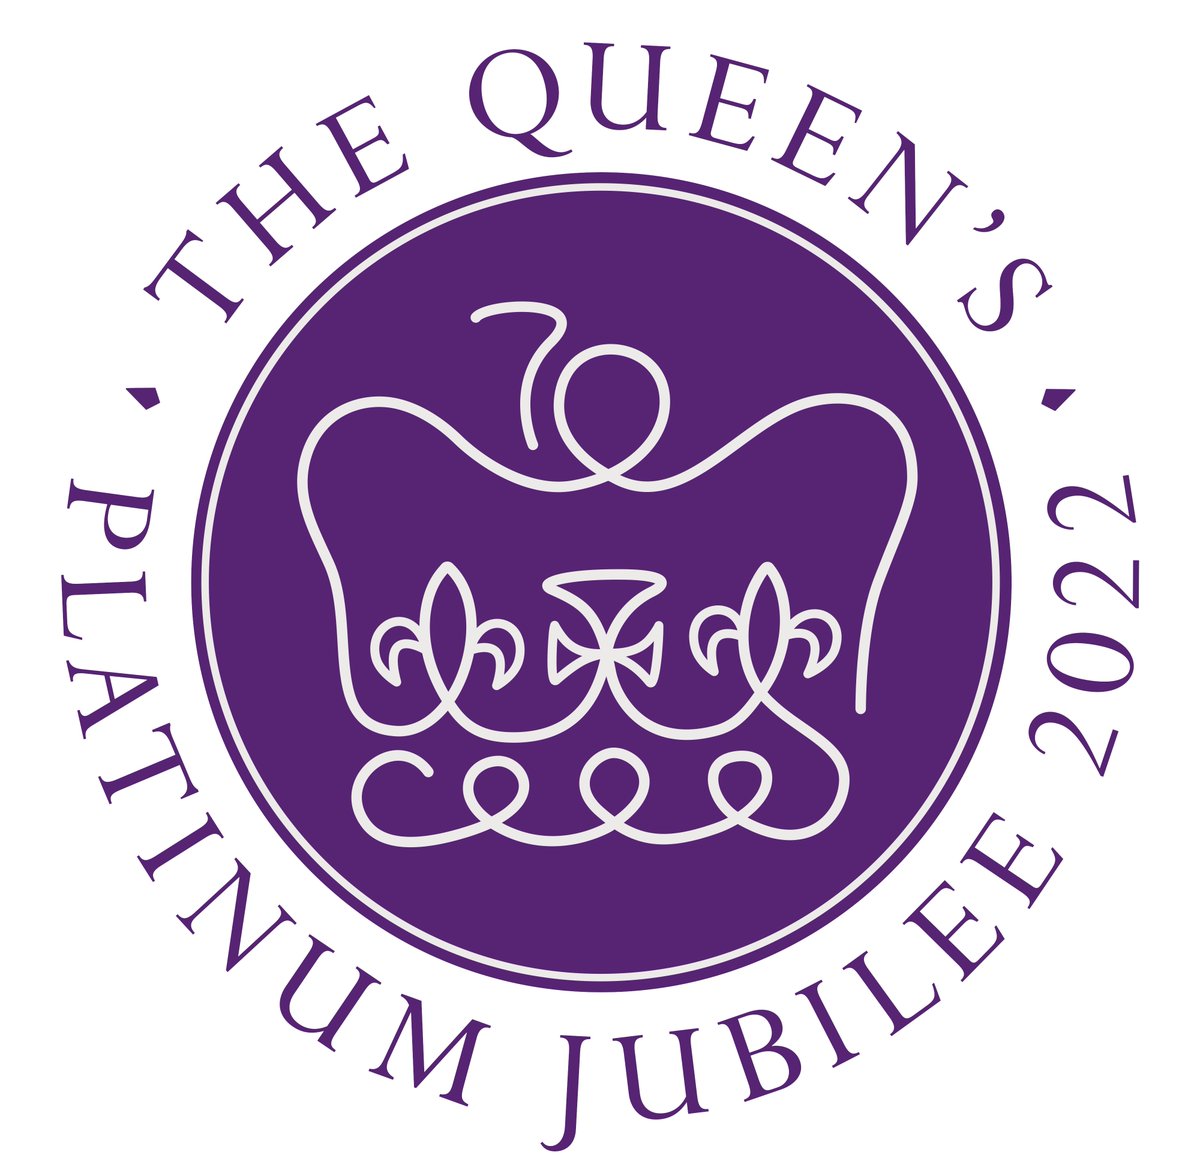 This year, Her Majesty The Queen will become the first British Monarch to celebrate a Platinum Jubilee after 70 years of service. There's an extended bank holiday from Thurs 2 June to Sun 5 June Click here for info on how to celebrate stoke.gov.uk/.../505/the_qu…